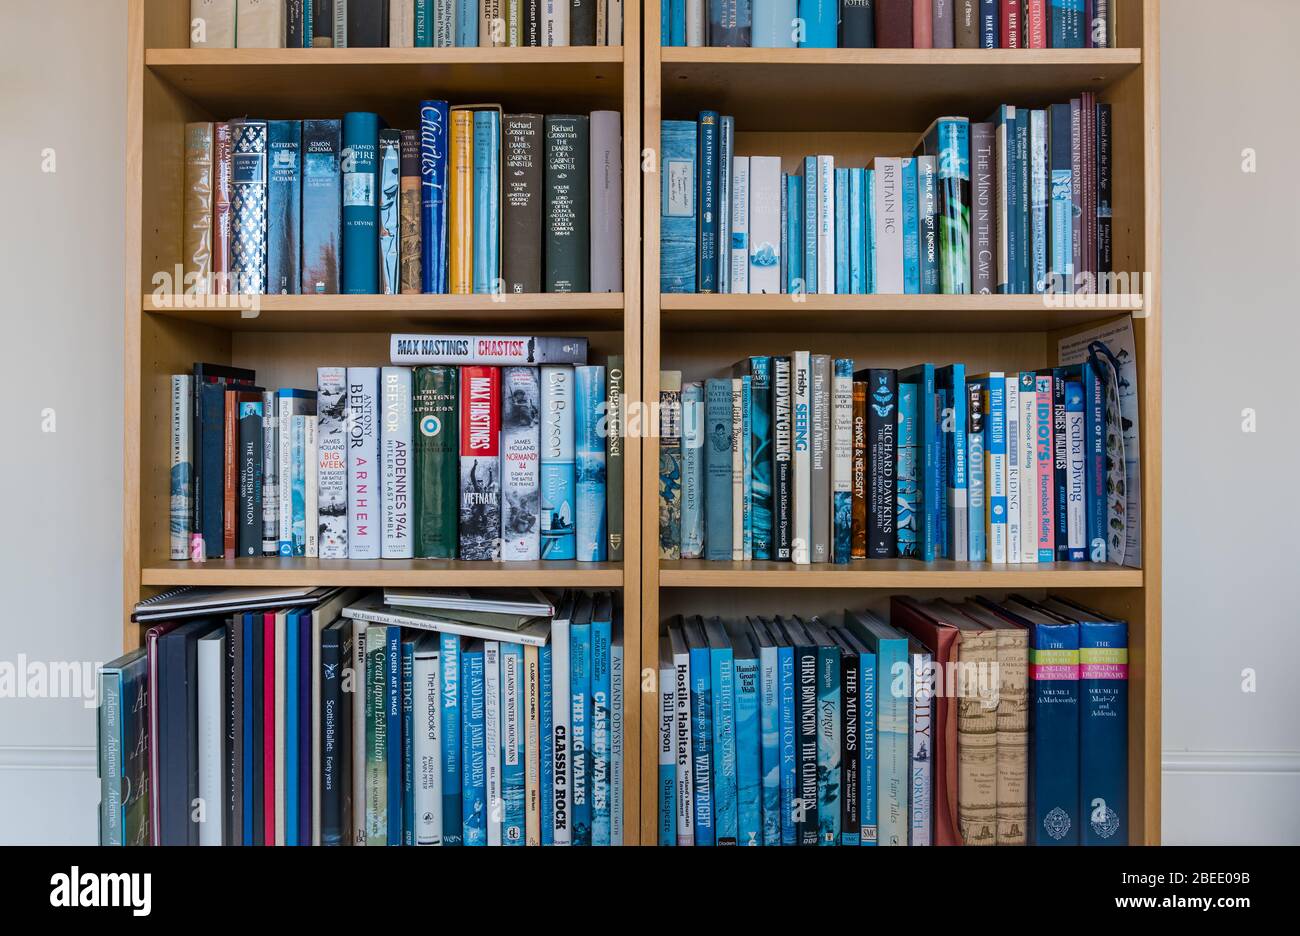 Bookshelves full of books in a home; fiction, non-fiction, history books, dictionaries, hill walking books, UK Stock Photo